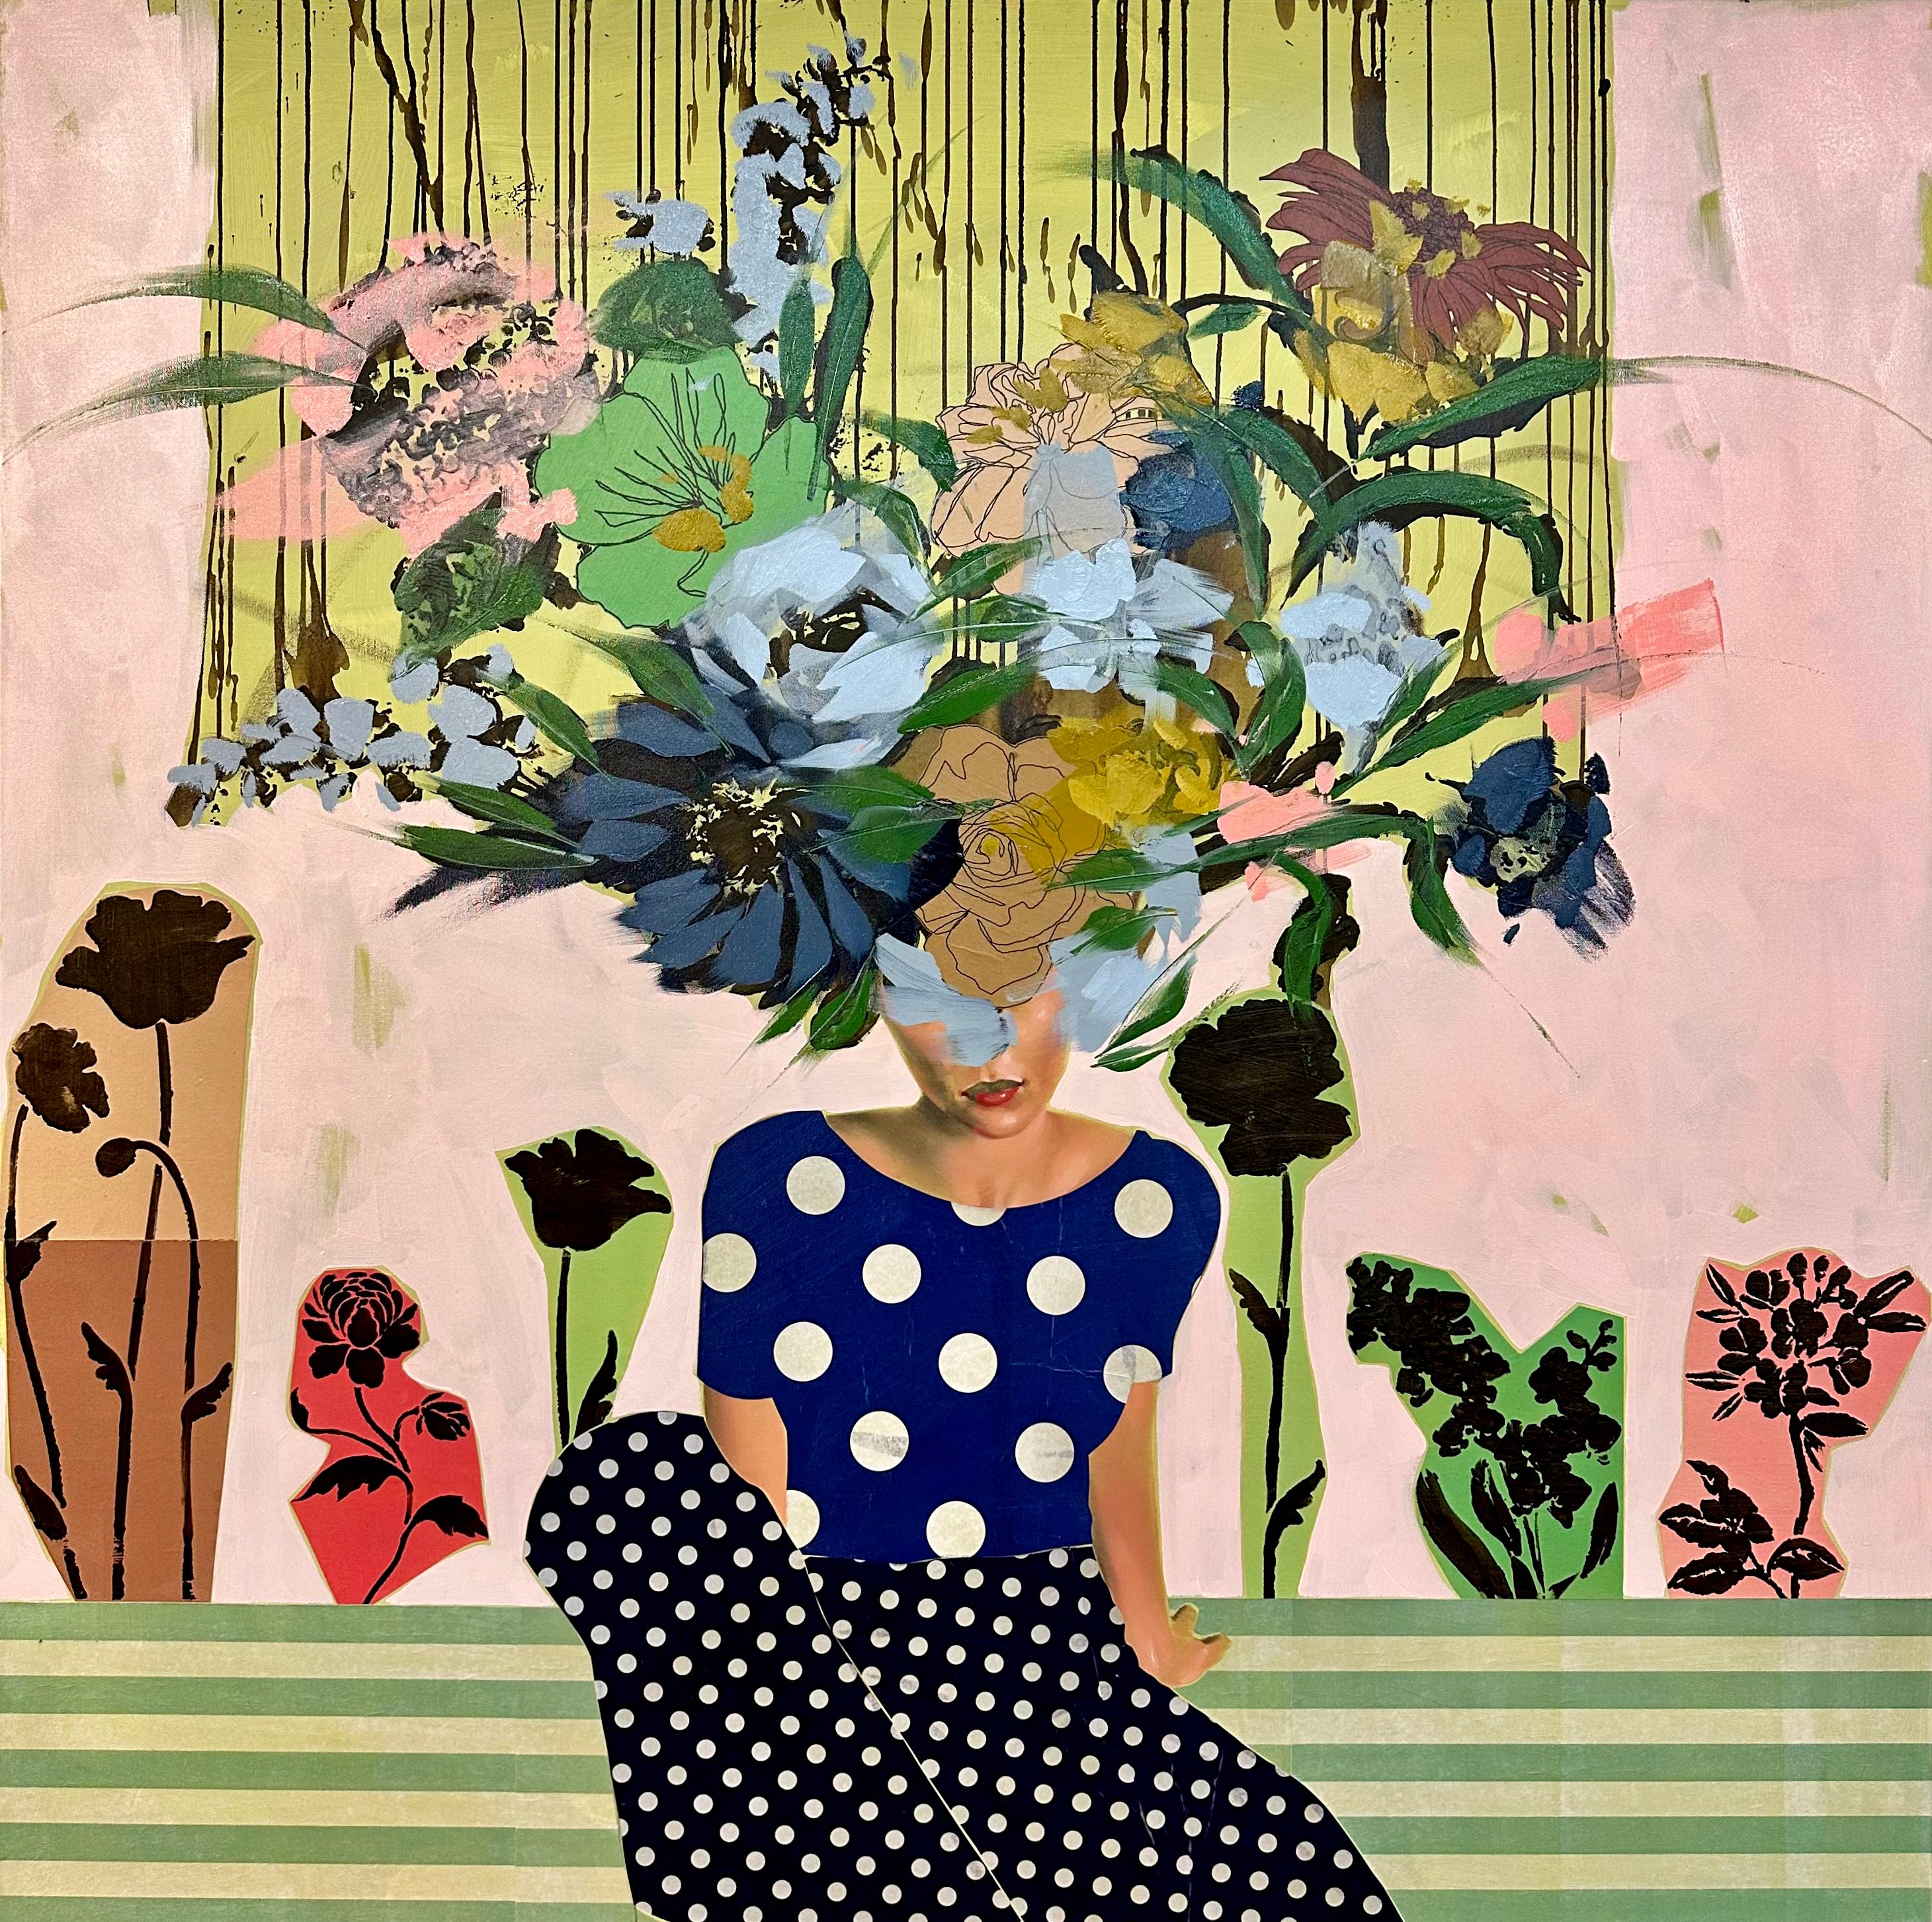 ANNA KINCAIDE
"Turn Your Magic On"
Oil & Mixed Media on Canvas
60 x 60 inches

Communicating emotion and narrative with limited assistance from her figure’s facial expressions, Anna Kincaide creates cascades of flowers that cover her subjects to